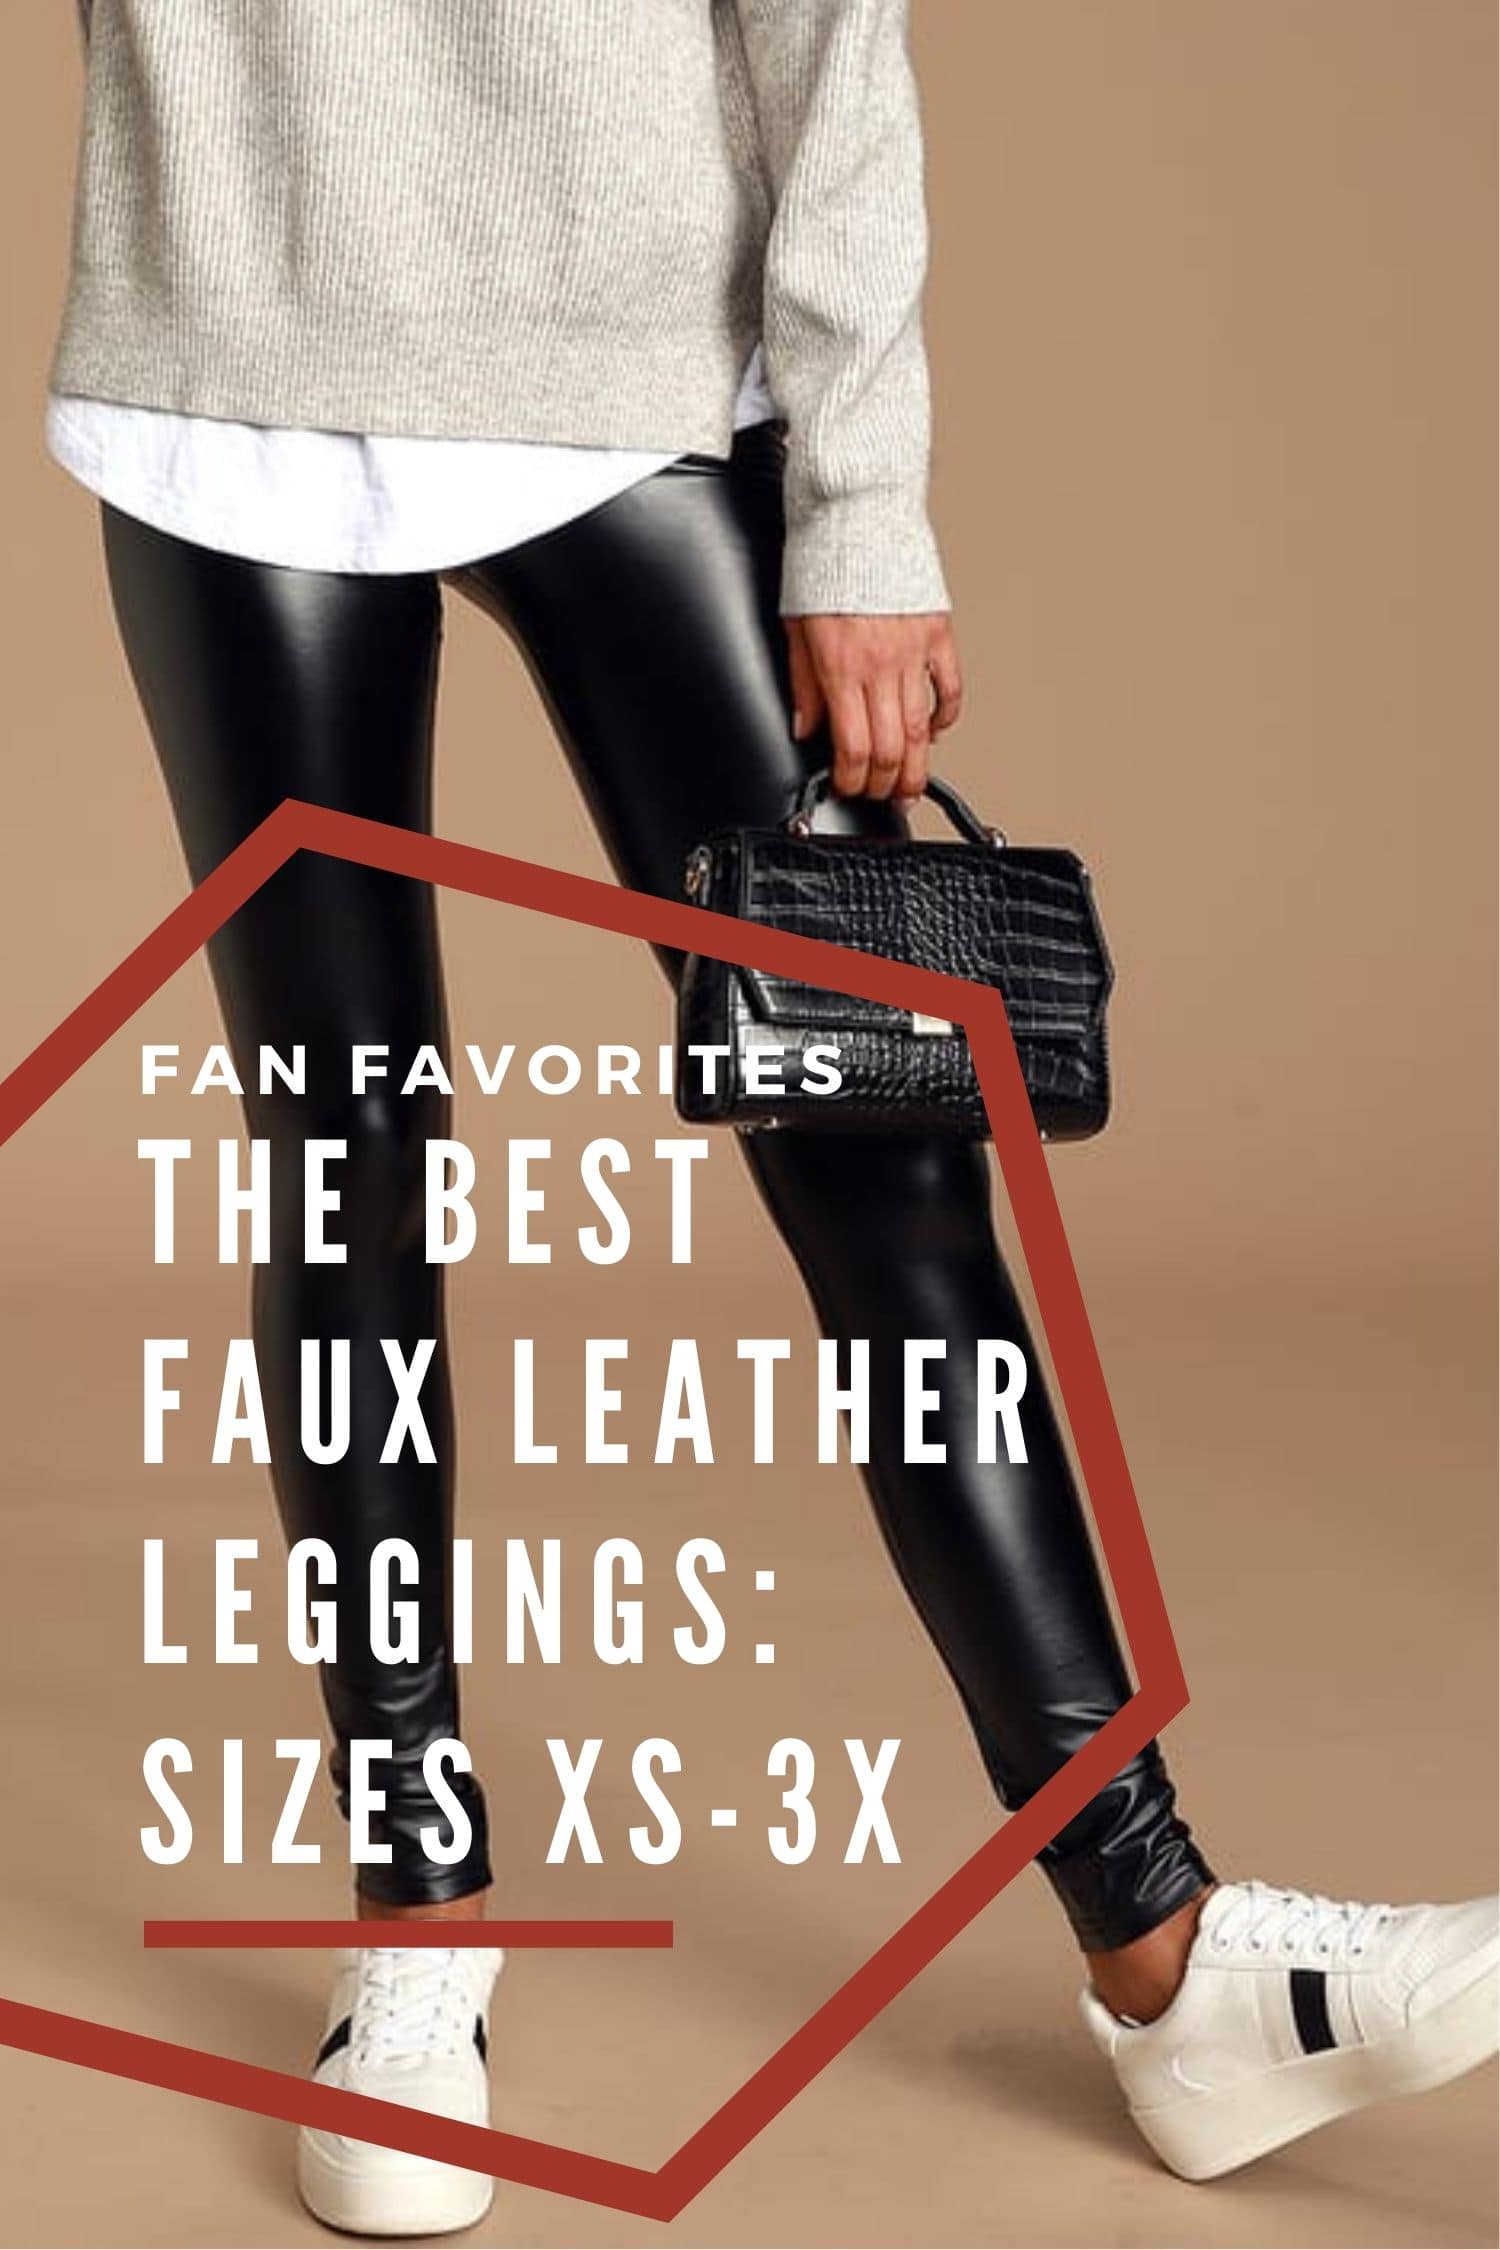 Run my favorite faux leather leggings are on sale! 𝗖𝗼𝗺𝗺𝗲𝗻𝘁